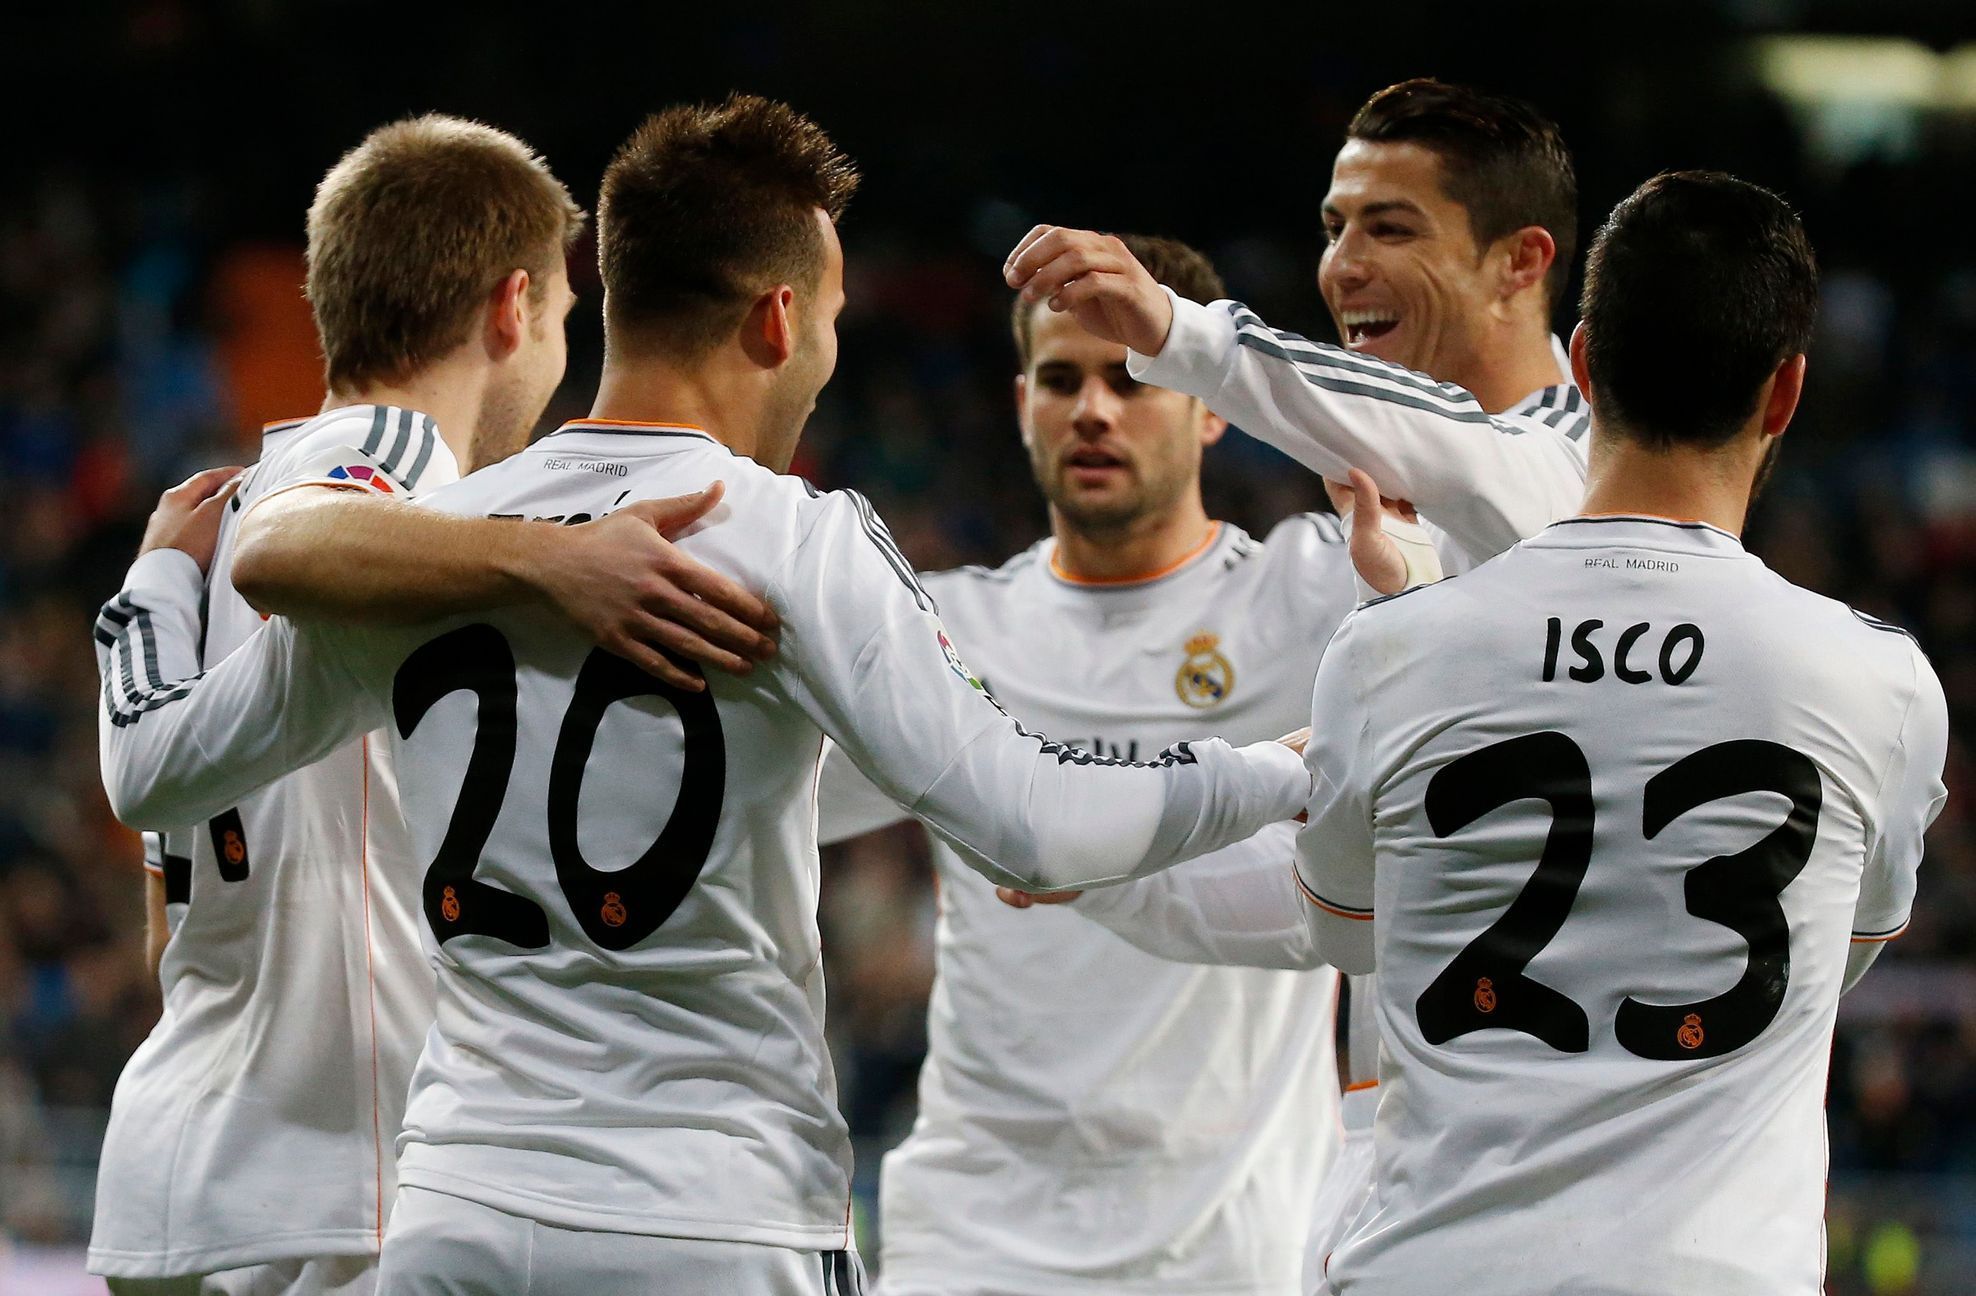 Real Madrid's Jese Rodriguez celebrates scoring against Espanyol with his teammates during their Spanish King's Cup match at Santiago Bernabeu stadium in Madrid